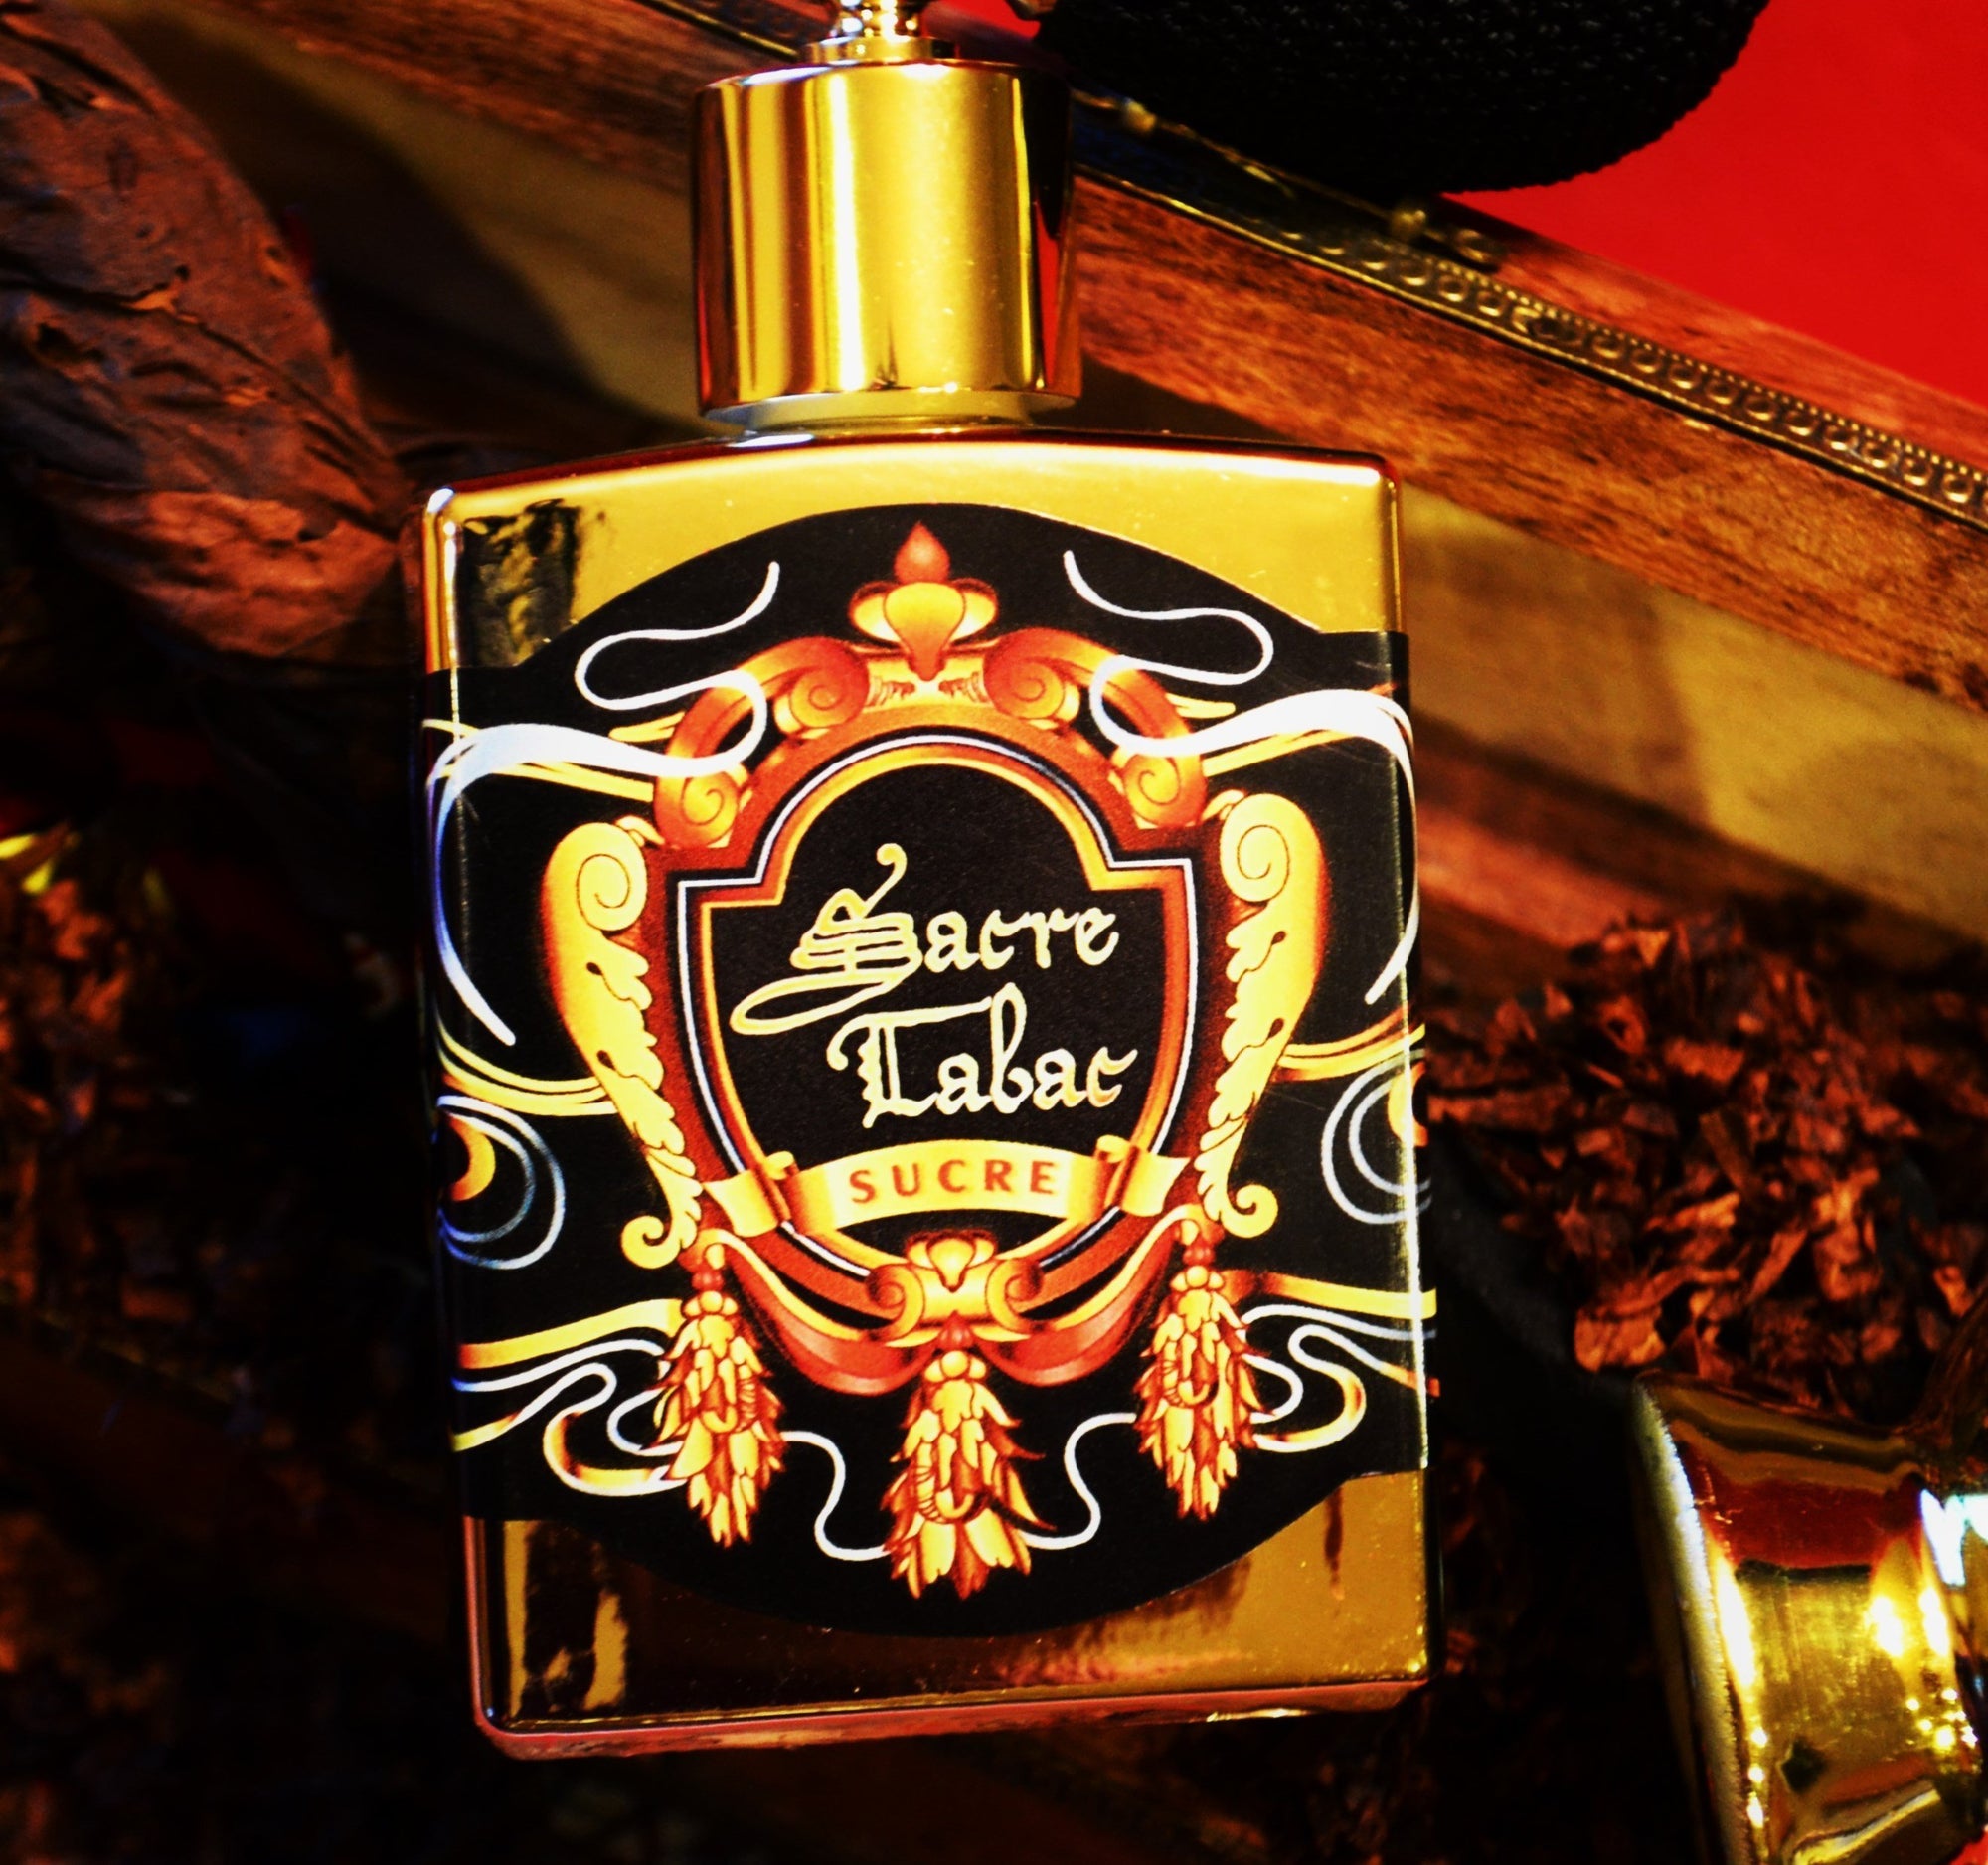 New Fragrance Review: House of Matriarch Sacre Tabac Part 1: Sucre + Hookah Memories in a Bottle Draw